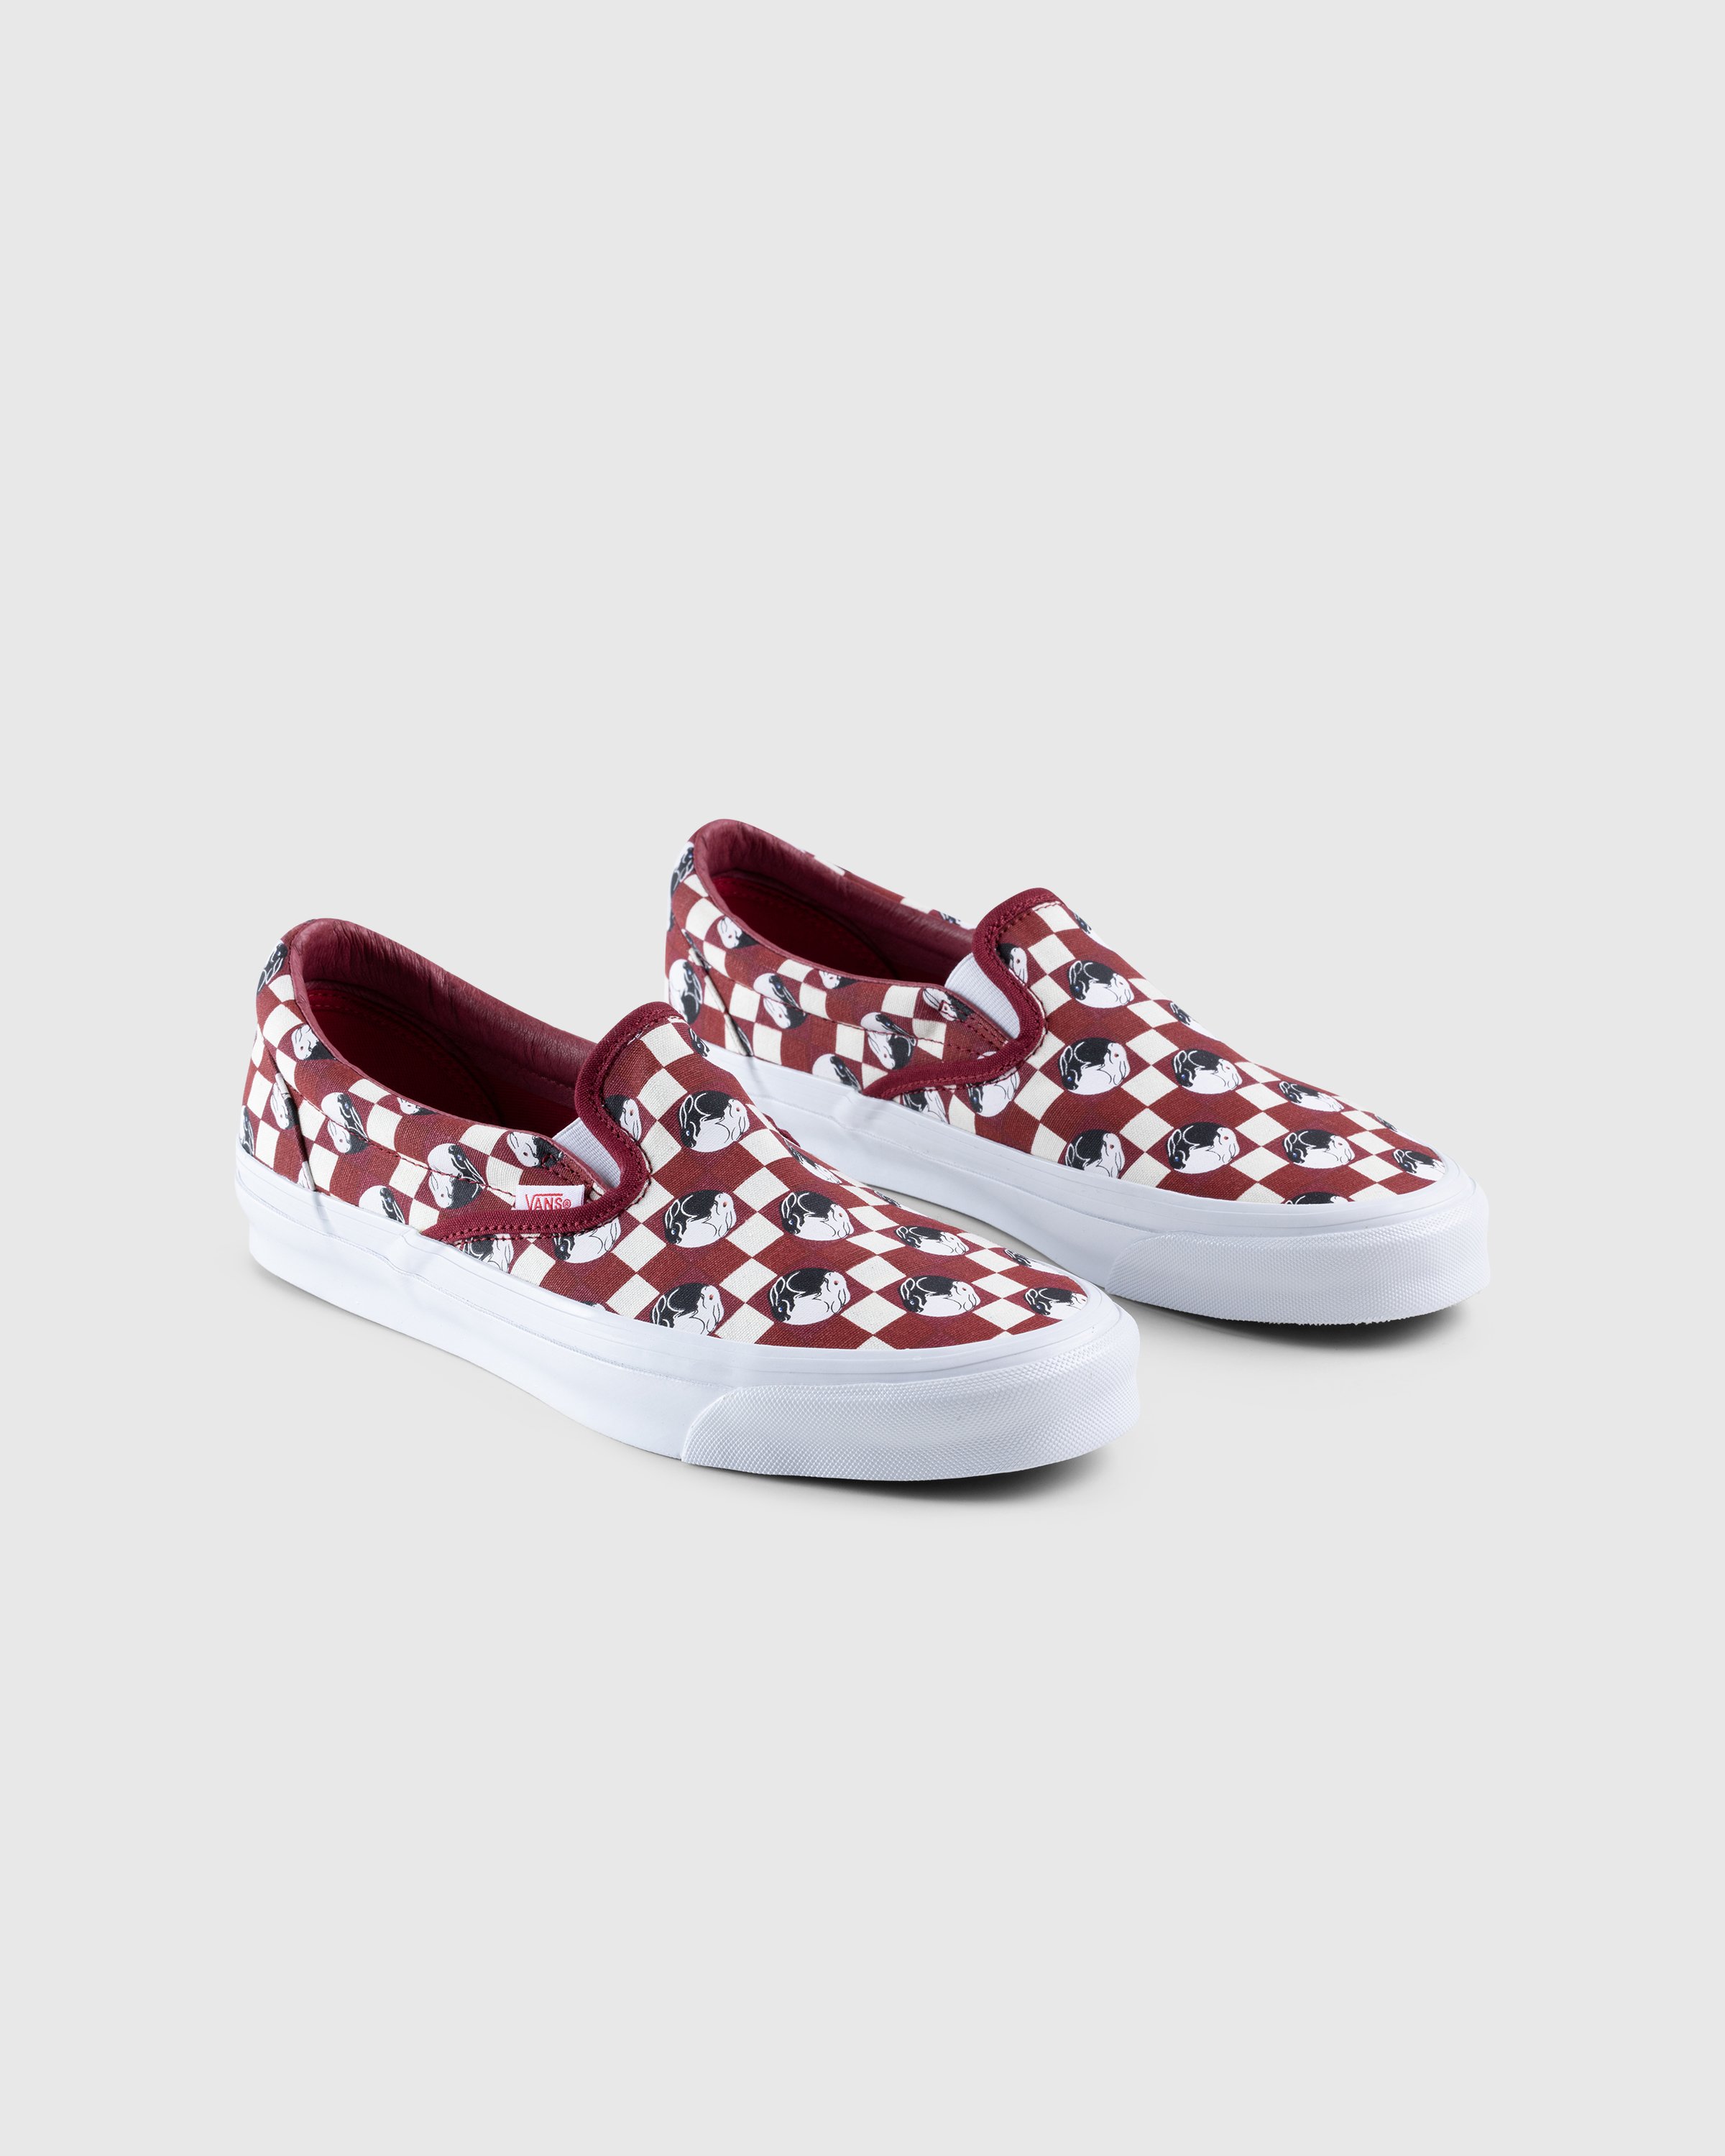 Vans - UA OG Classic Slip-On Year of the Rabbit Red - Footwear - Red - Image 3